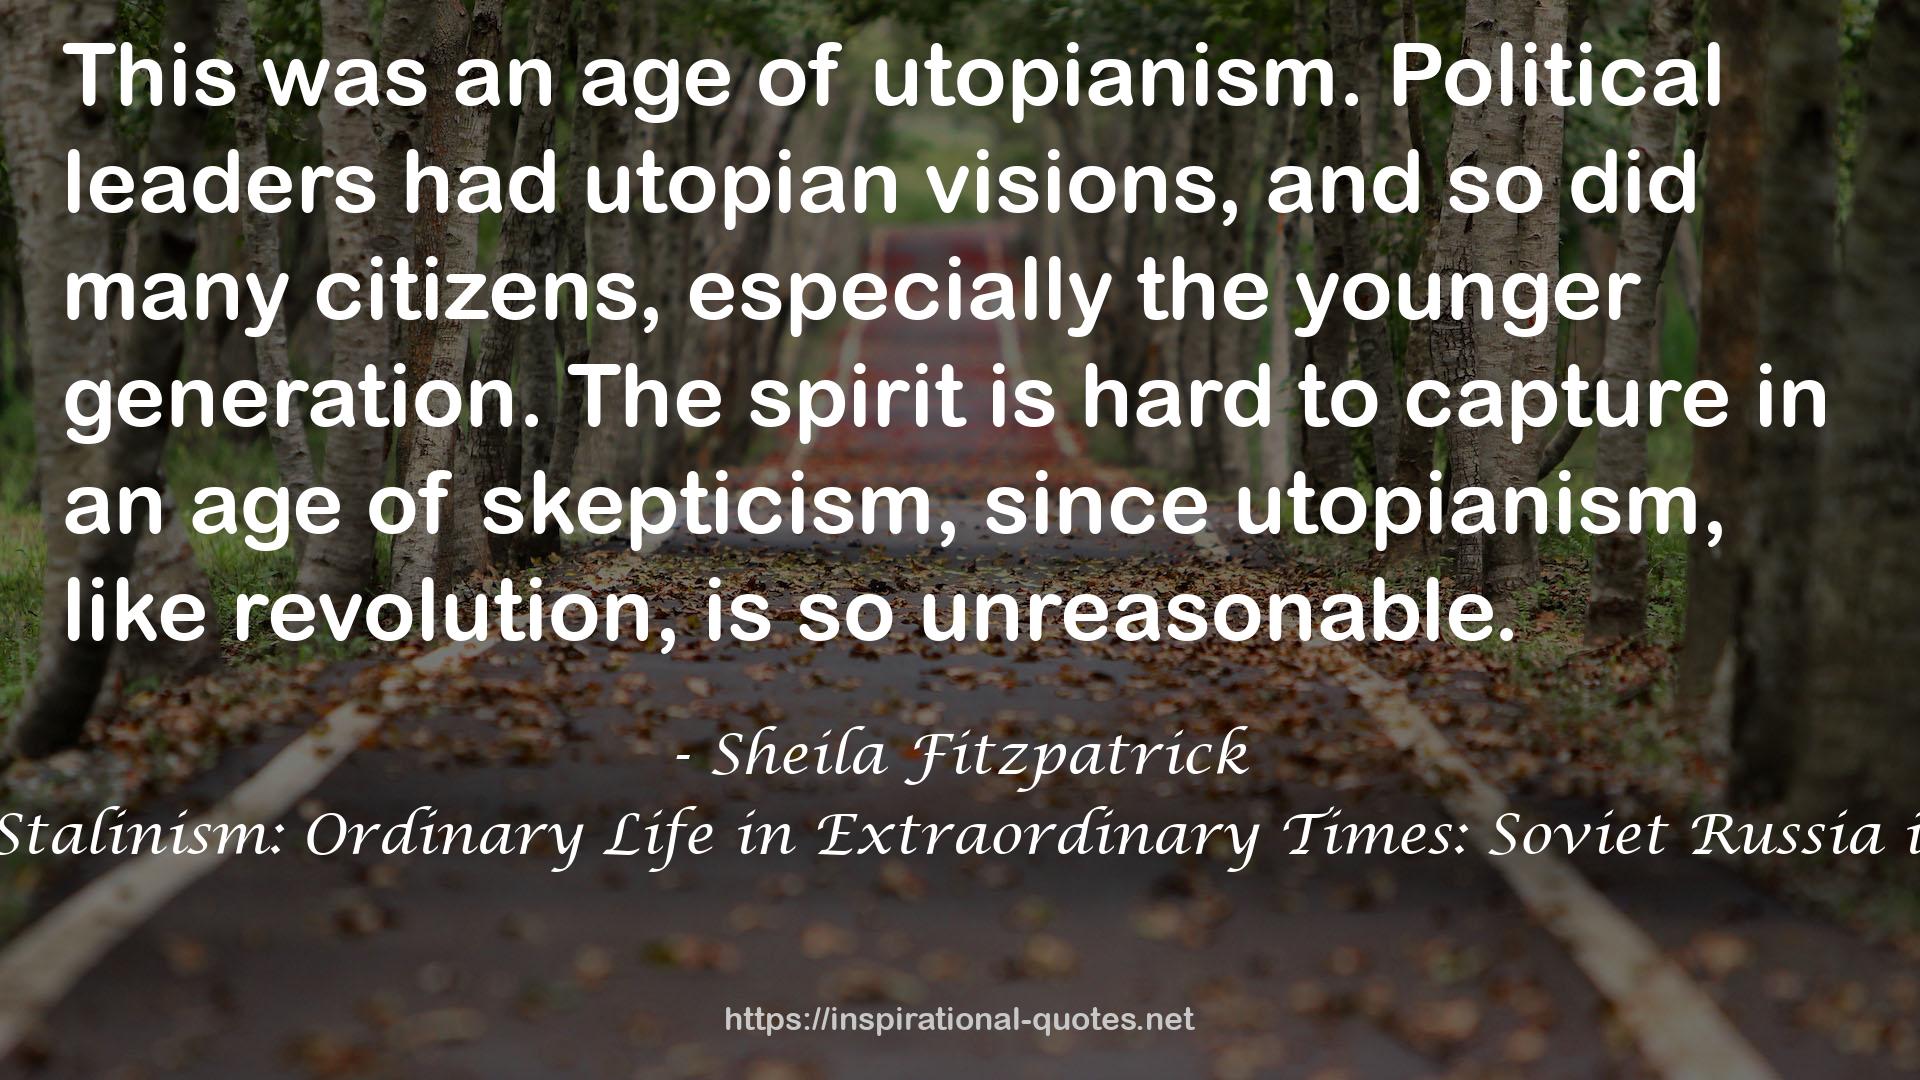 Everyday Stalinism: Ordinary Life in Extraordinary Times: Soviet Russia in the 1930s QUOTES